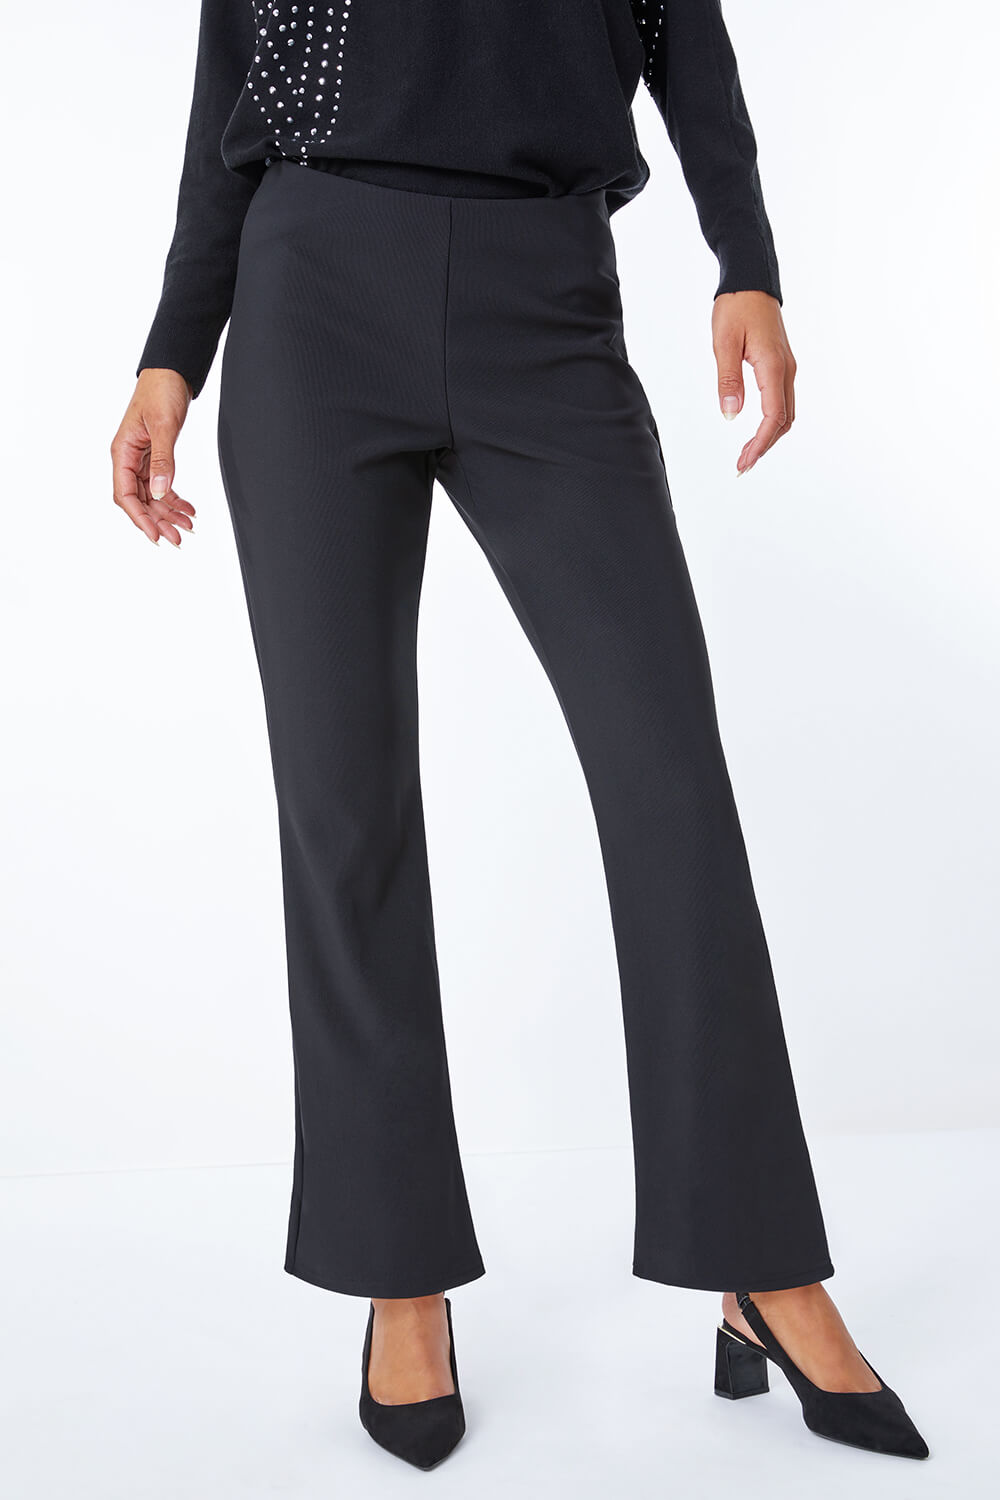 Black Flared Stretch Trousers , Image 4 of 4